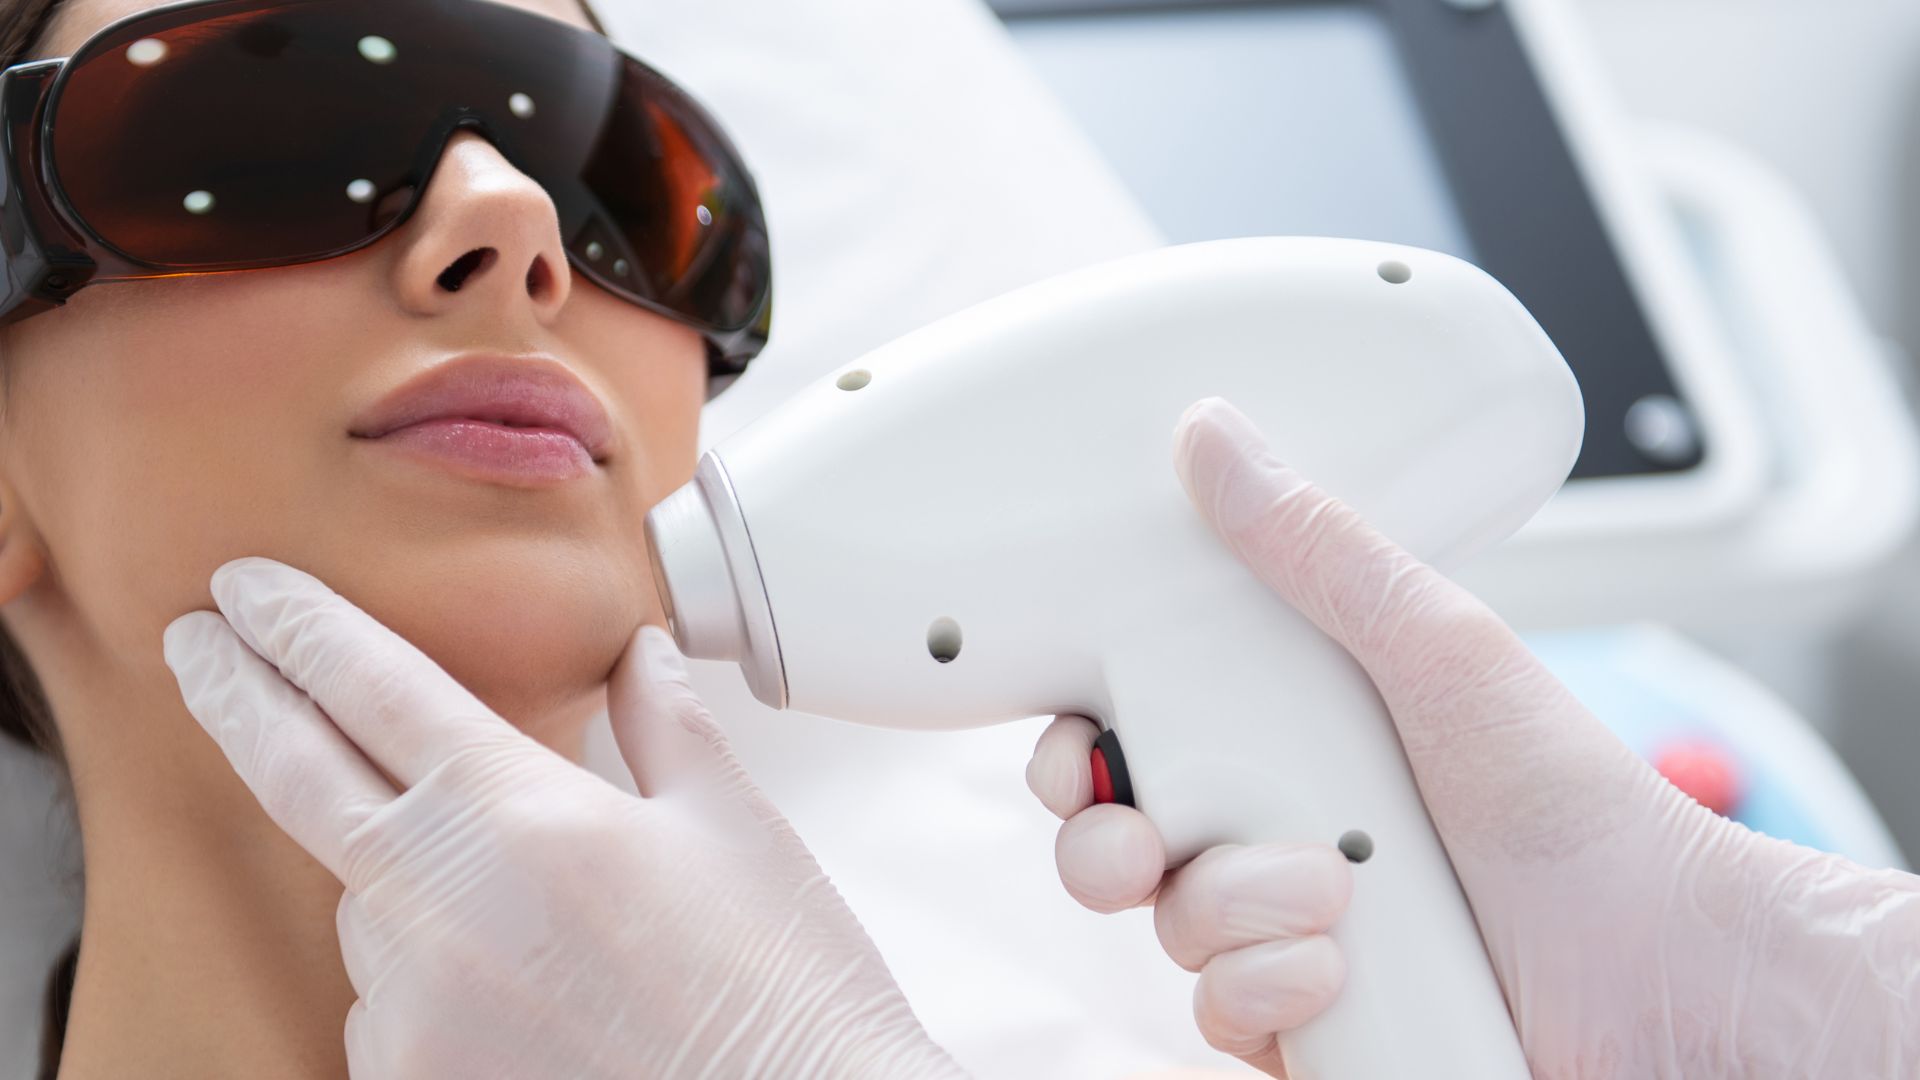 Laser Full Body Hair Removal in Dubai - Woman Getting Laser Treatments on her Chin